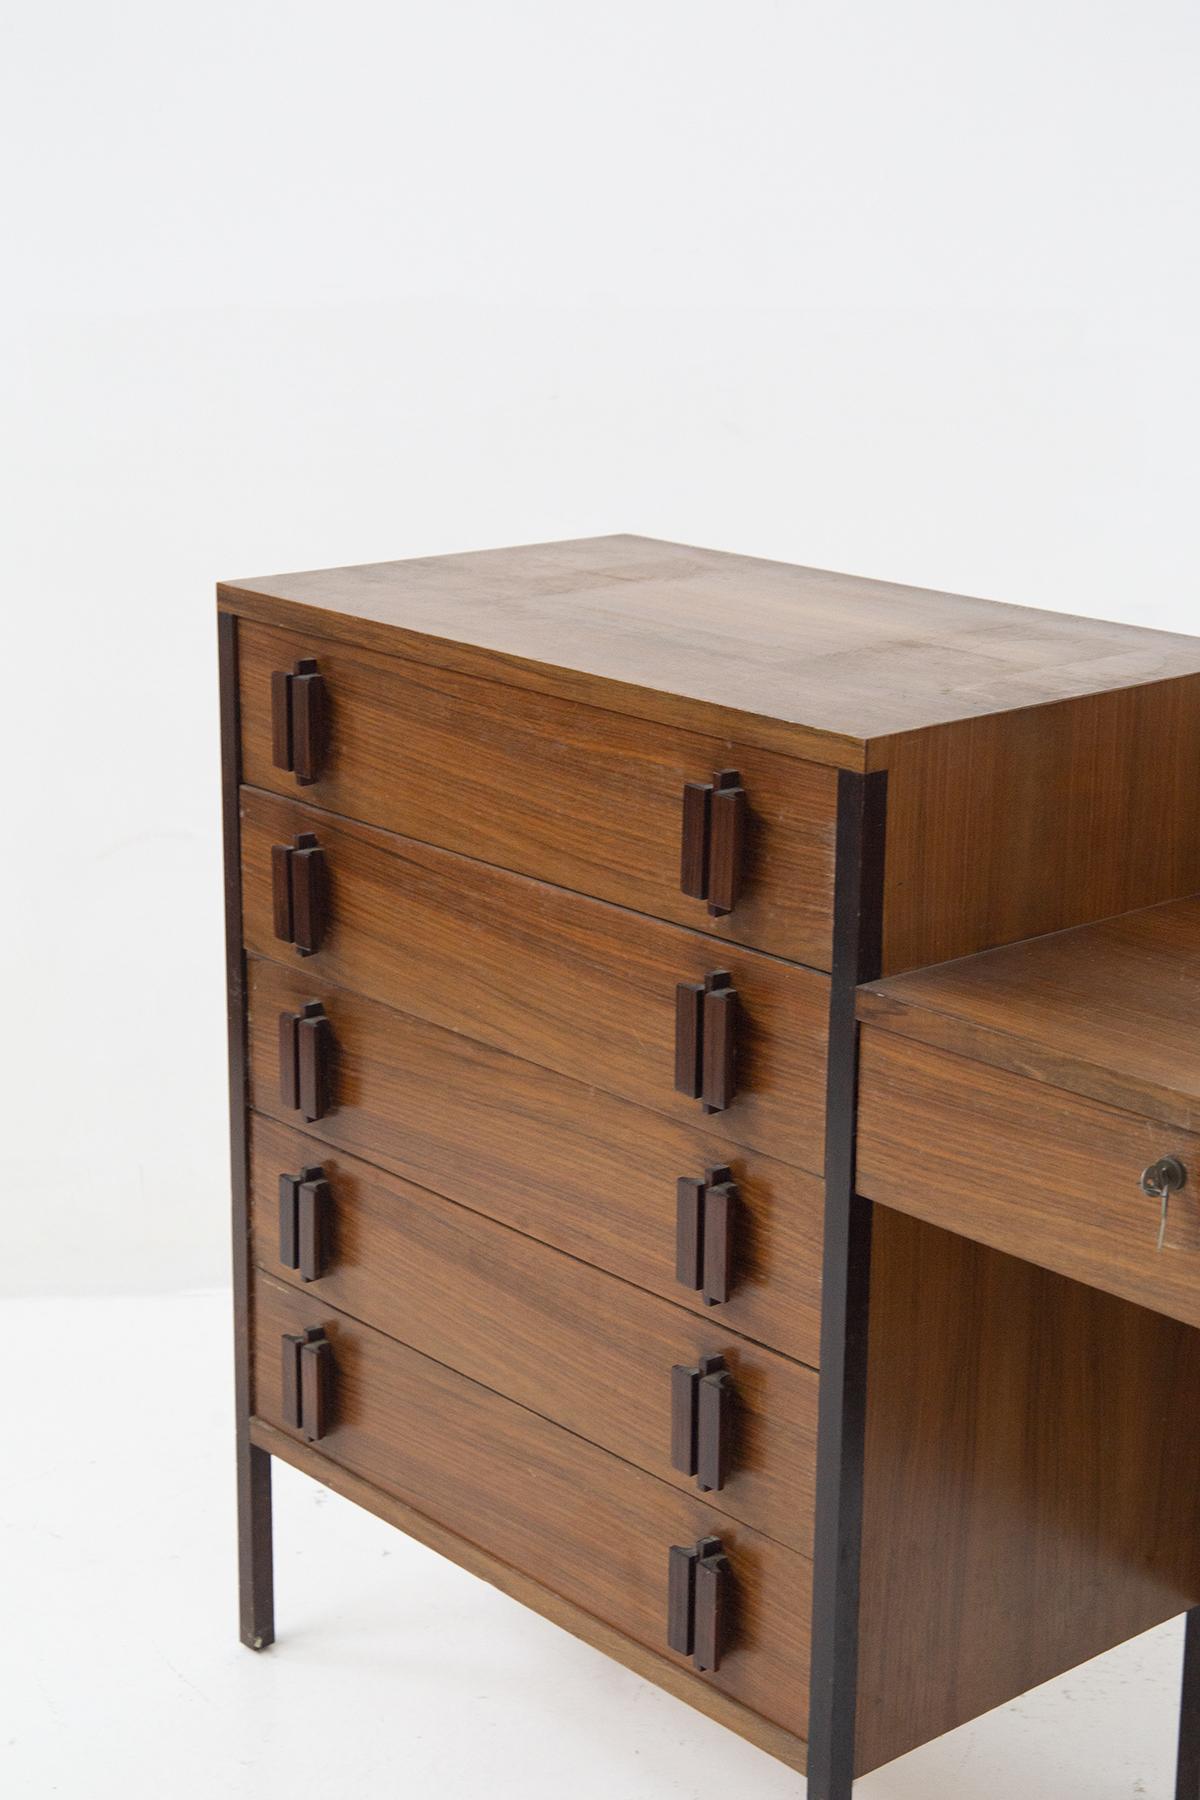 Beautiful and rare desk with drawers designed by the great Ico Parisi in the 1950s for the fine Italian manufacturer MIM Roma.
The desk echoes the elements of the Positano bedside table.
The desk is made entirely of very beautiful light wood with